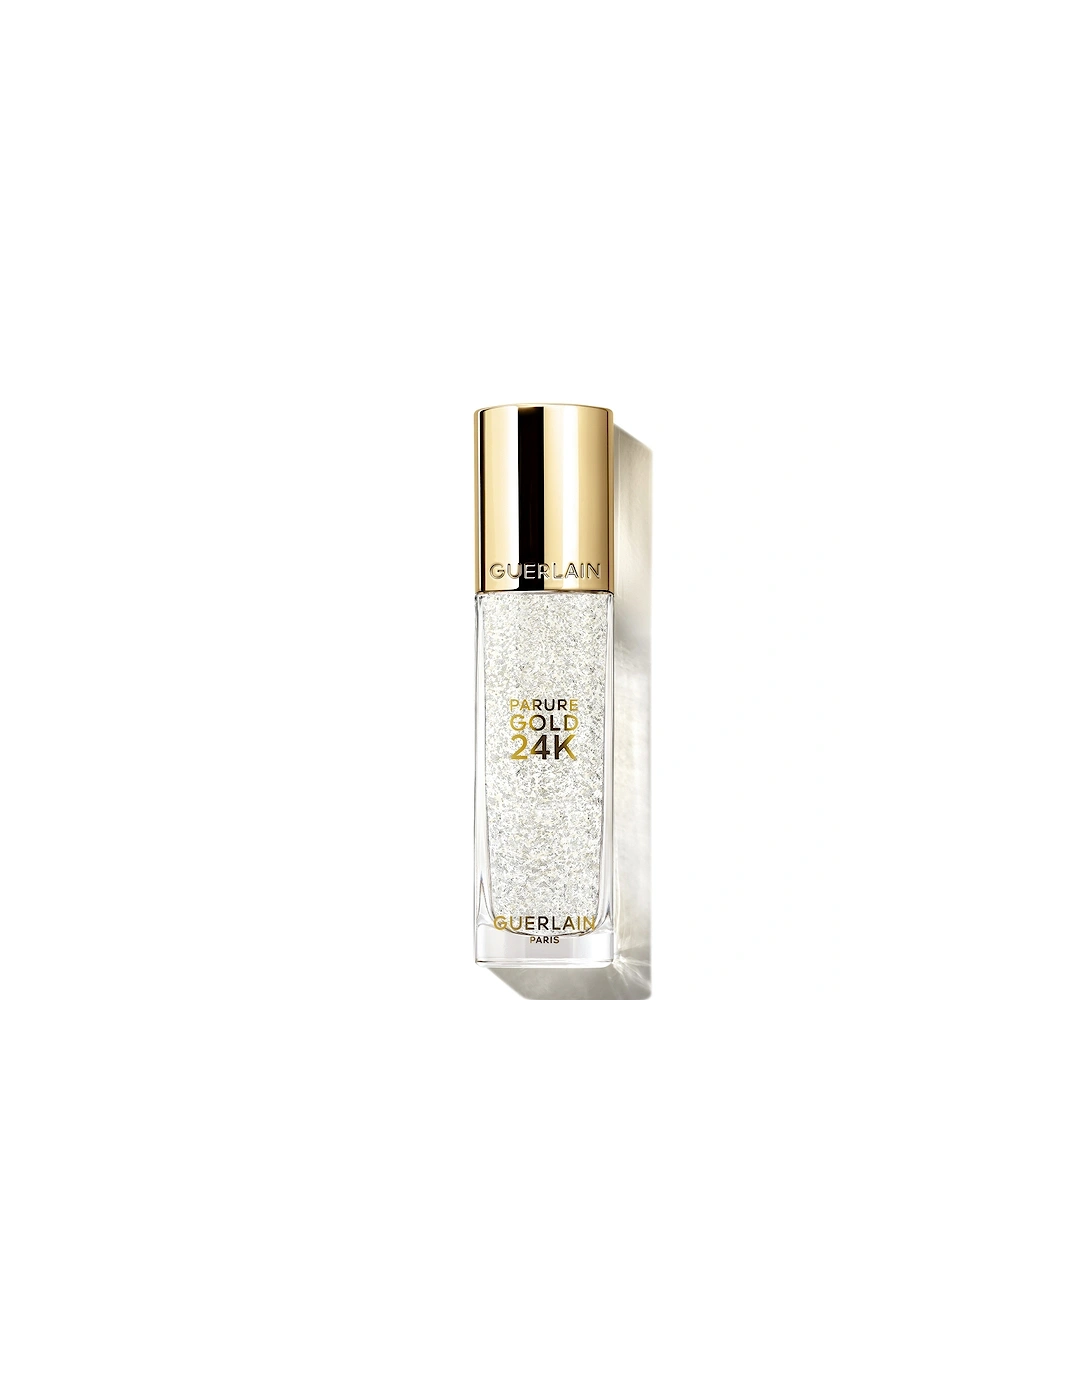 24H Hydration Parure Gold 24K Radiance Booster Perfection Primer - White Gold, 2 of 1